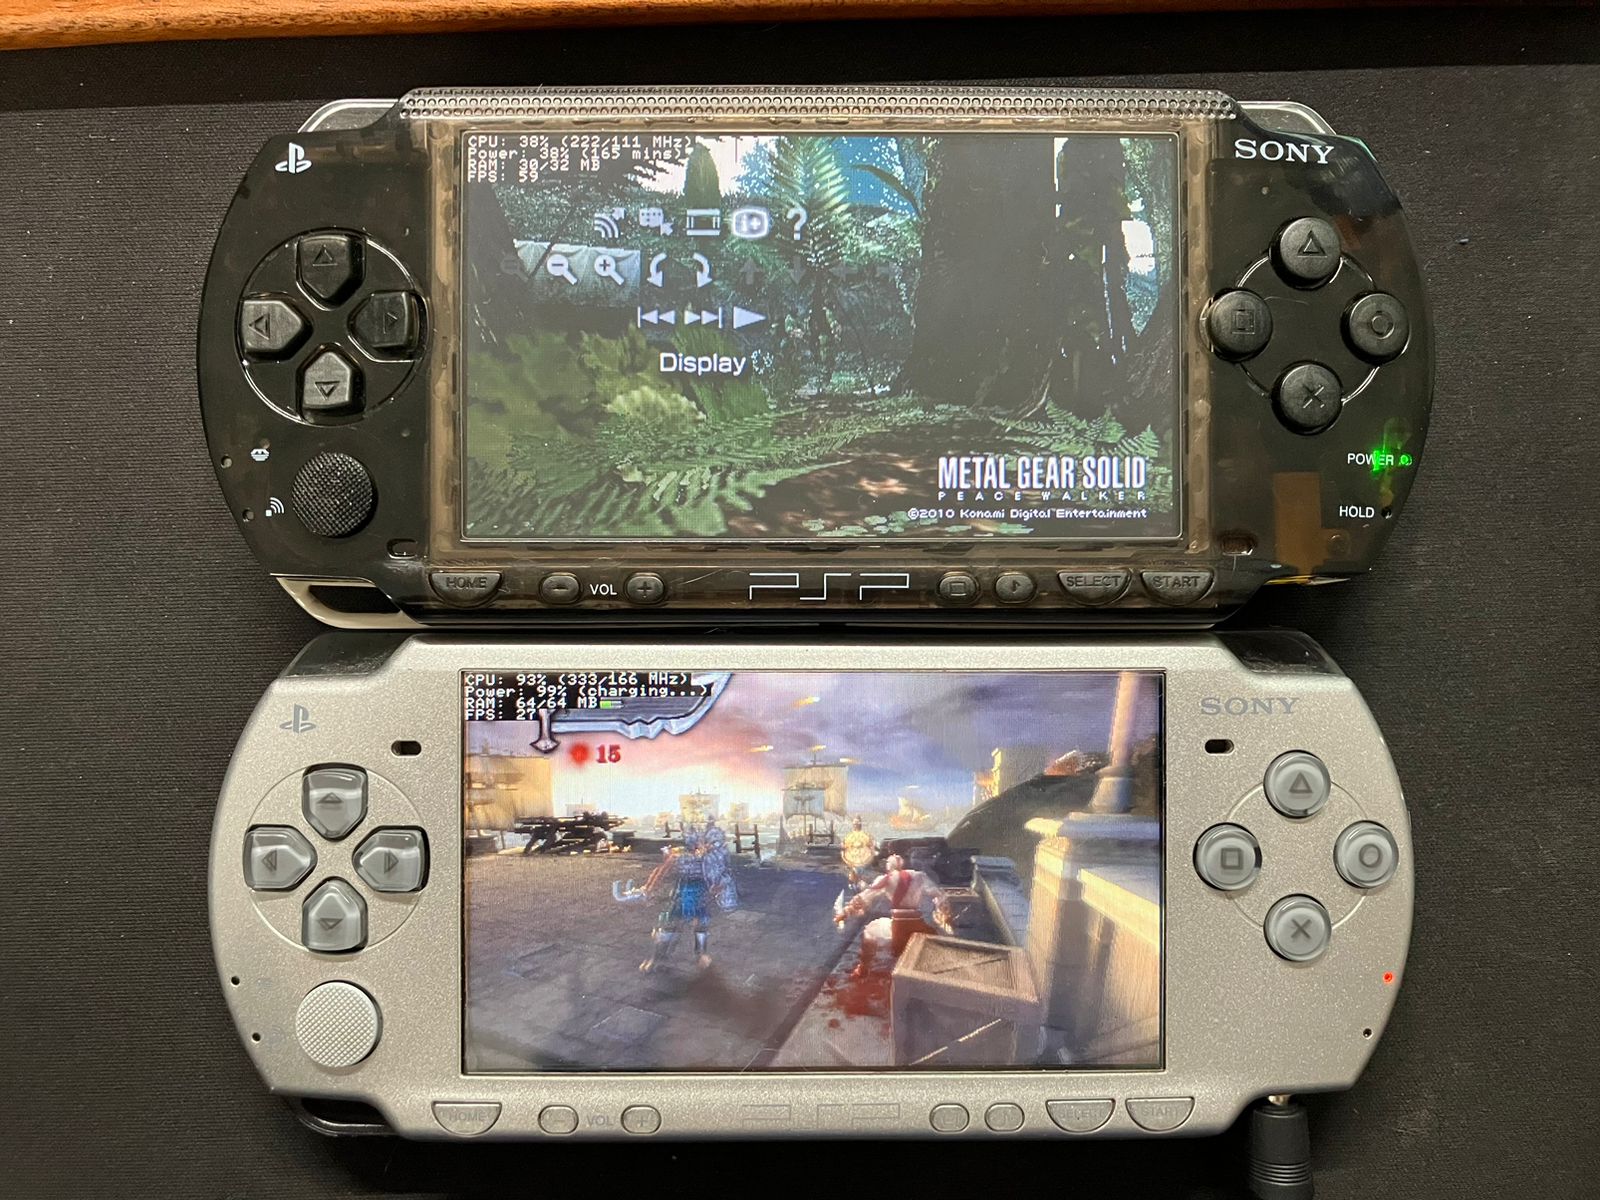 missyhud.prx working on a PSP 1000 XMB and PSP 2000 running Crisis Core: Final Fantasy VII